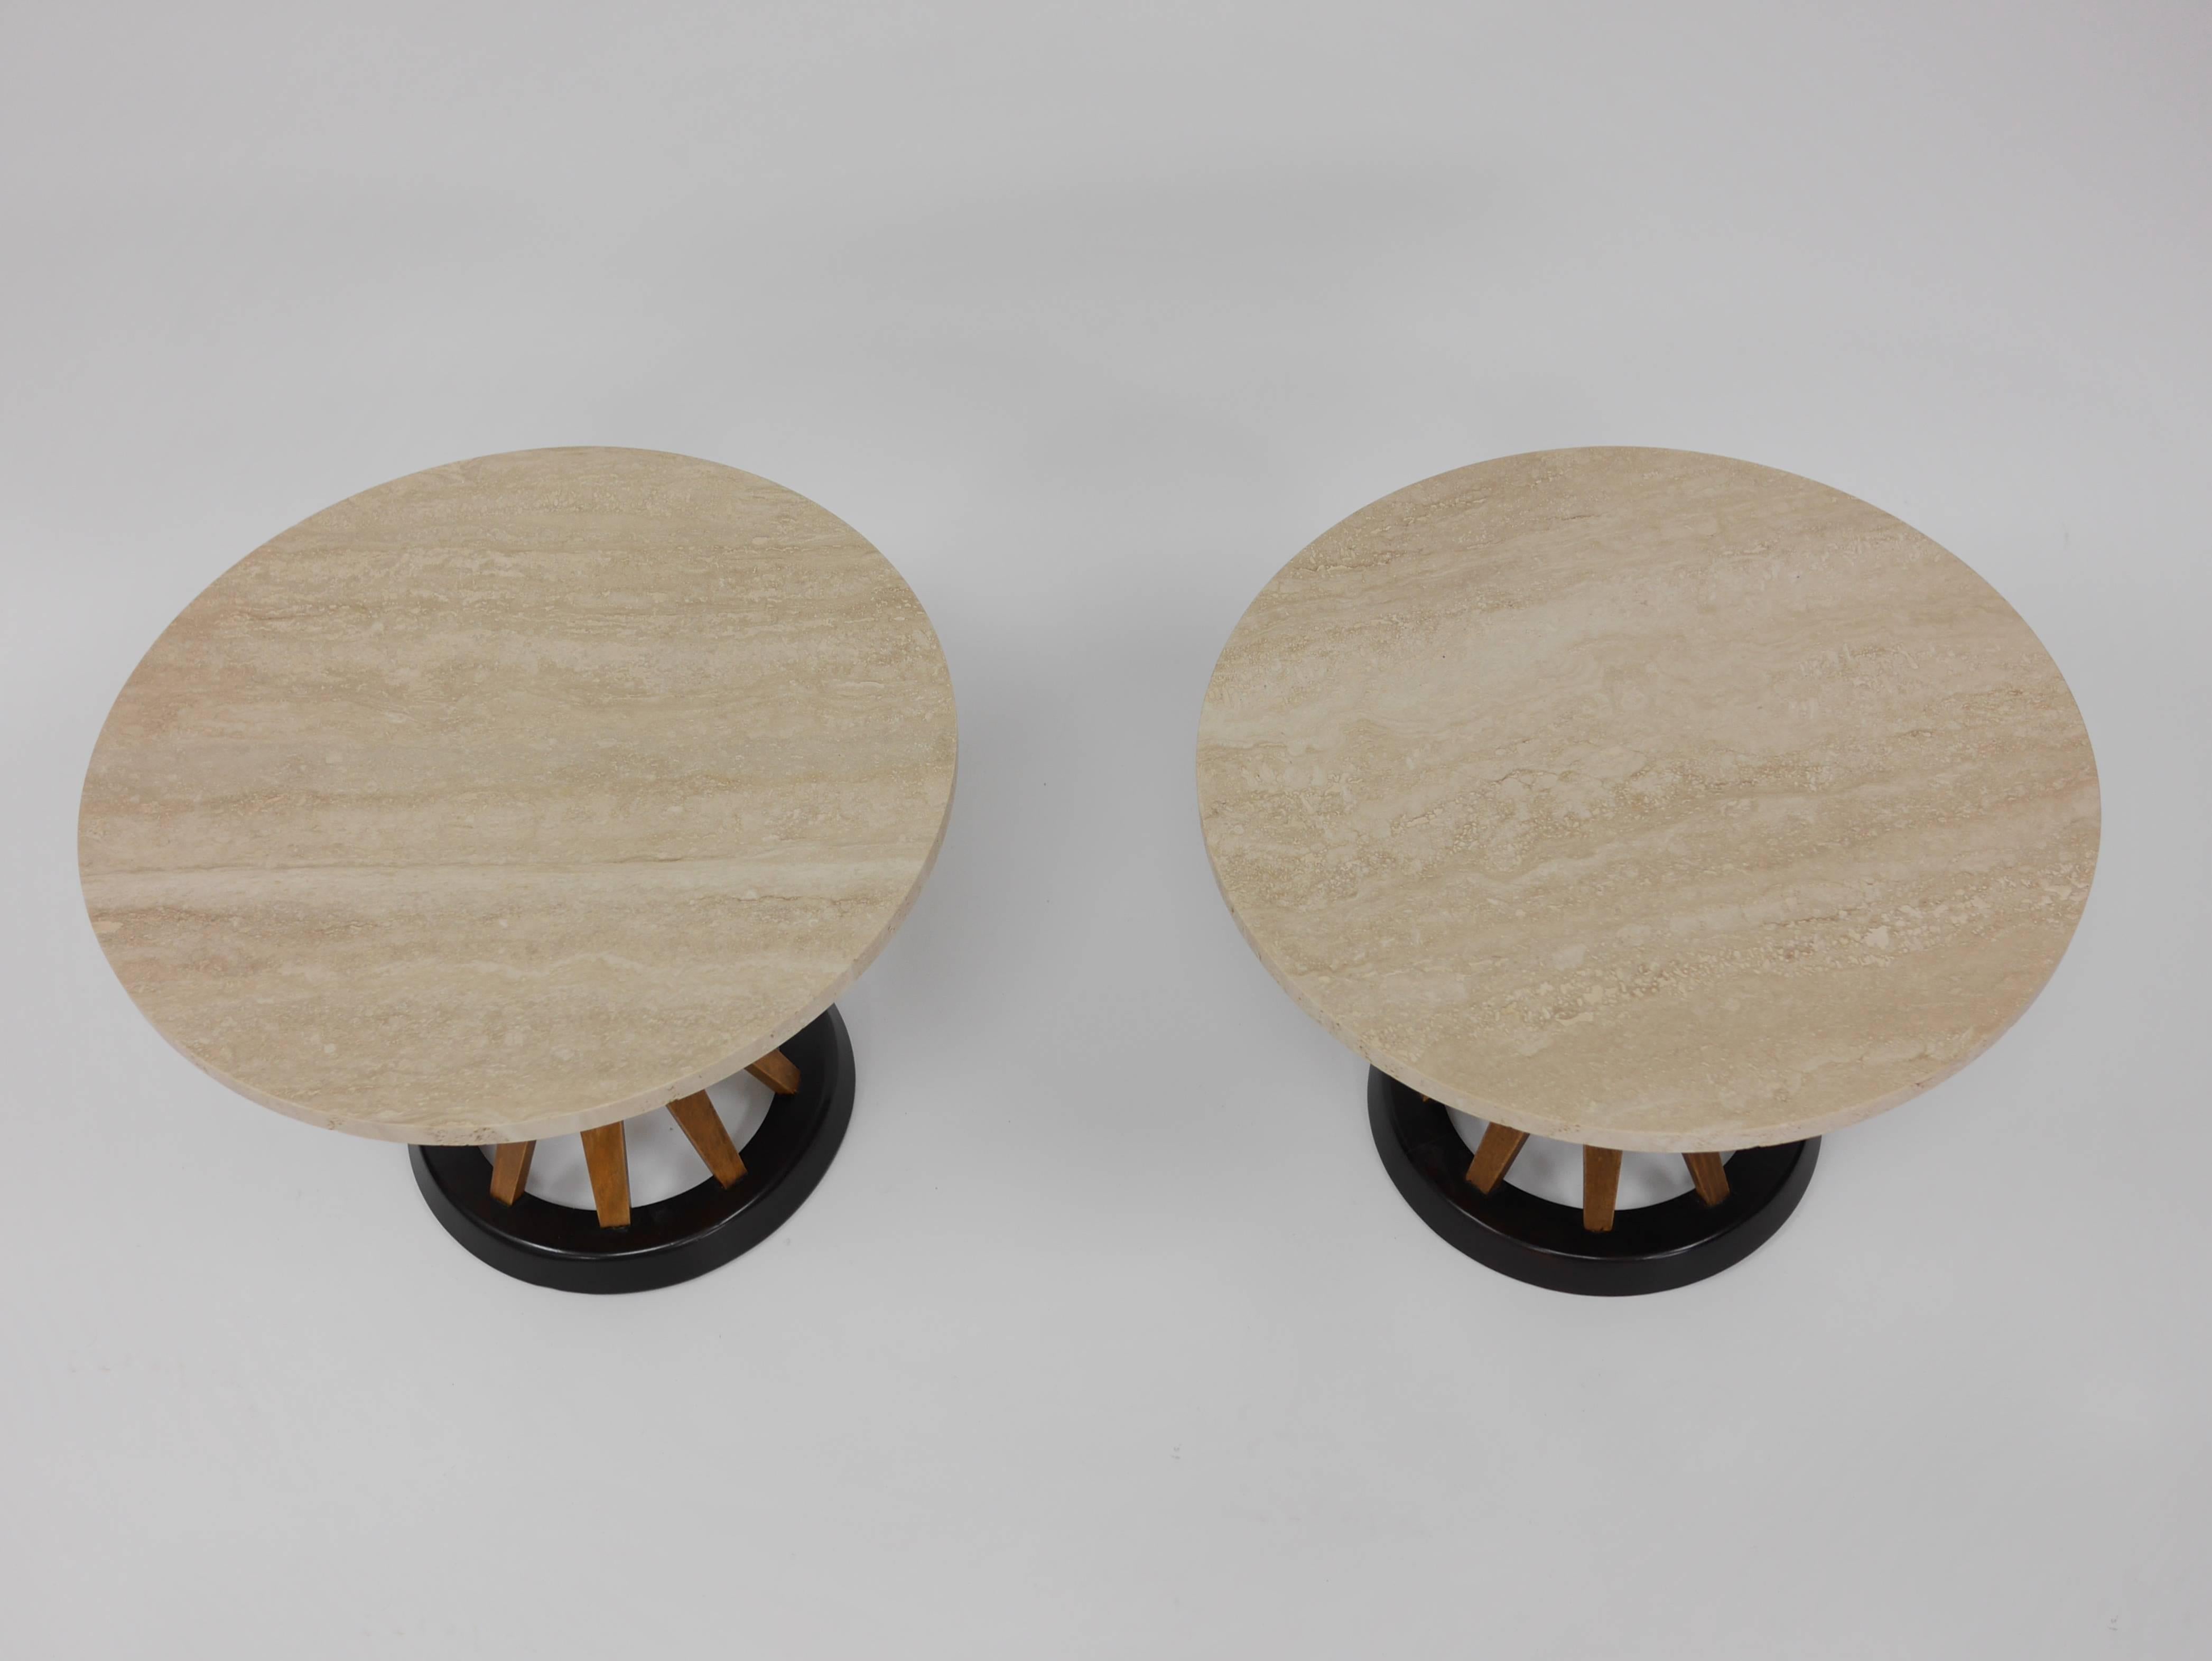 Pair of sheaf of wheat side tables by Edward Wormley for Dunbar. Having honed, matched Travertine tops and two tone Mahogany bases. Recent professional restoration.

Note: One table 15